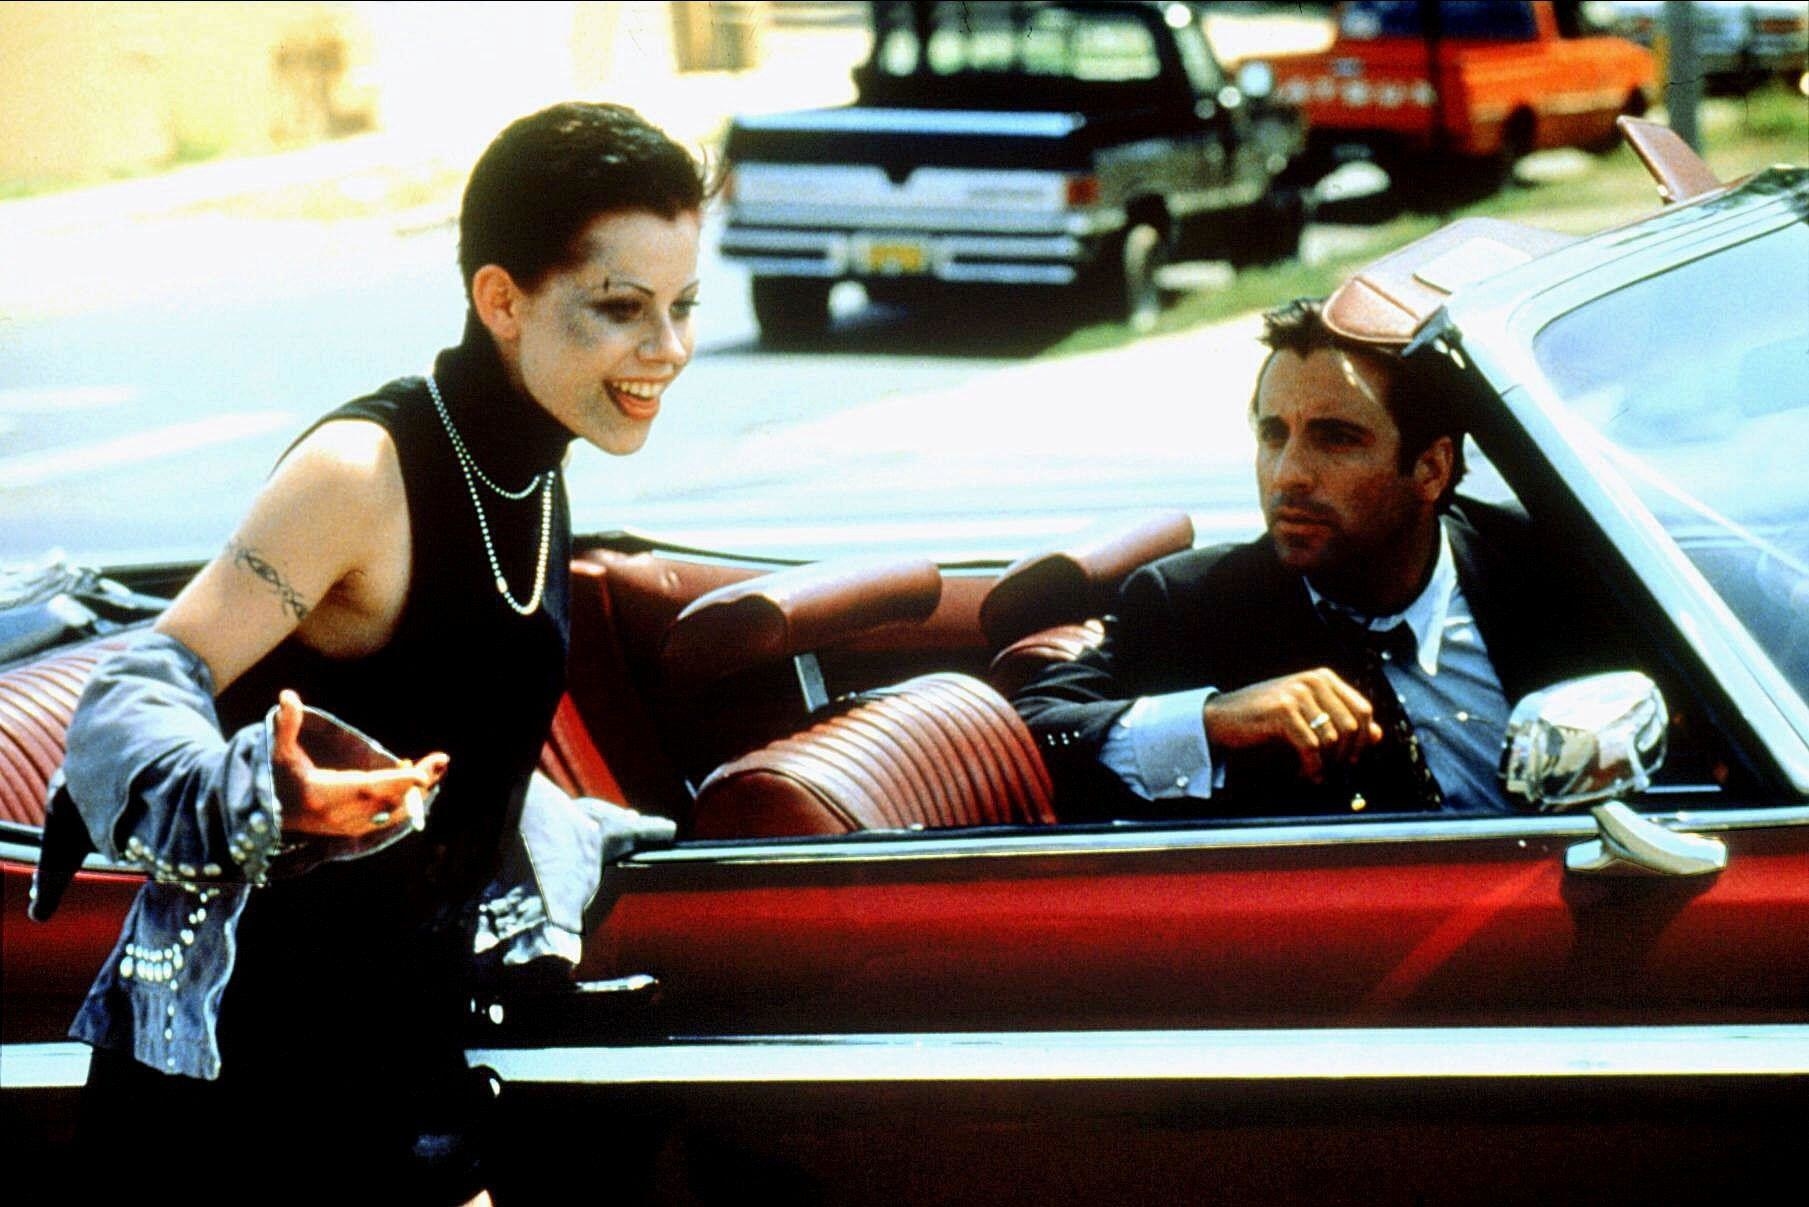 A short haired woman with messy make-up wears a wicked grin while a confused man in a convertible looks on